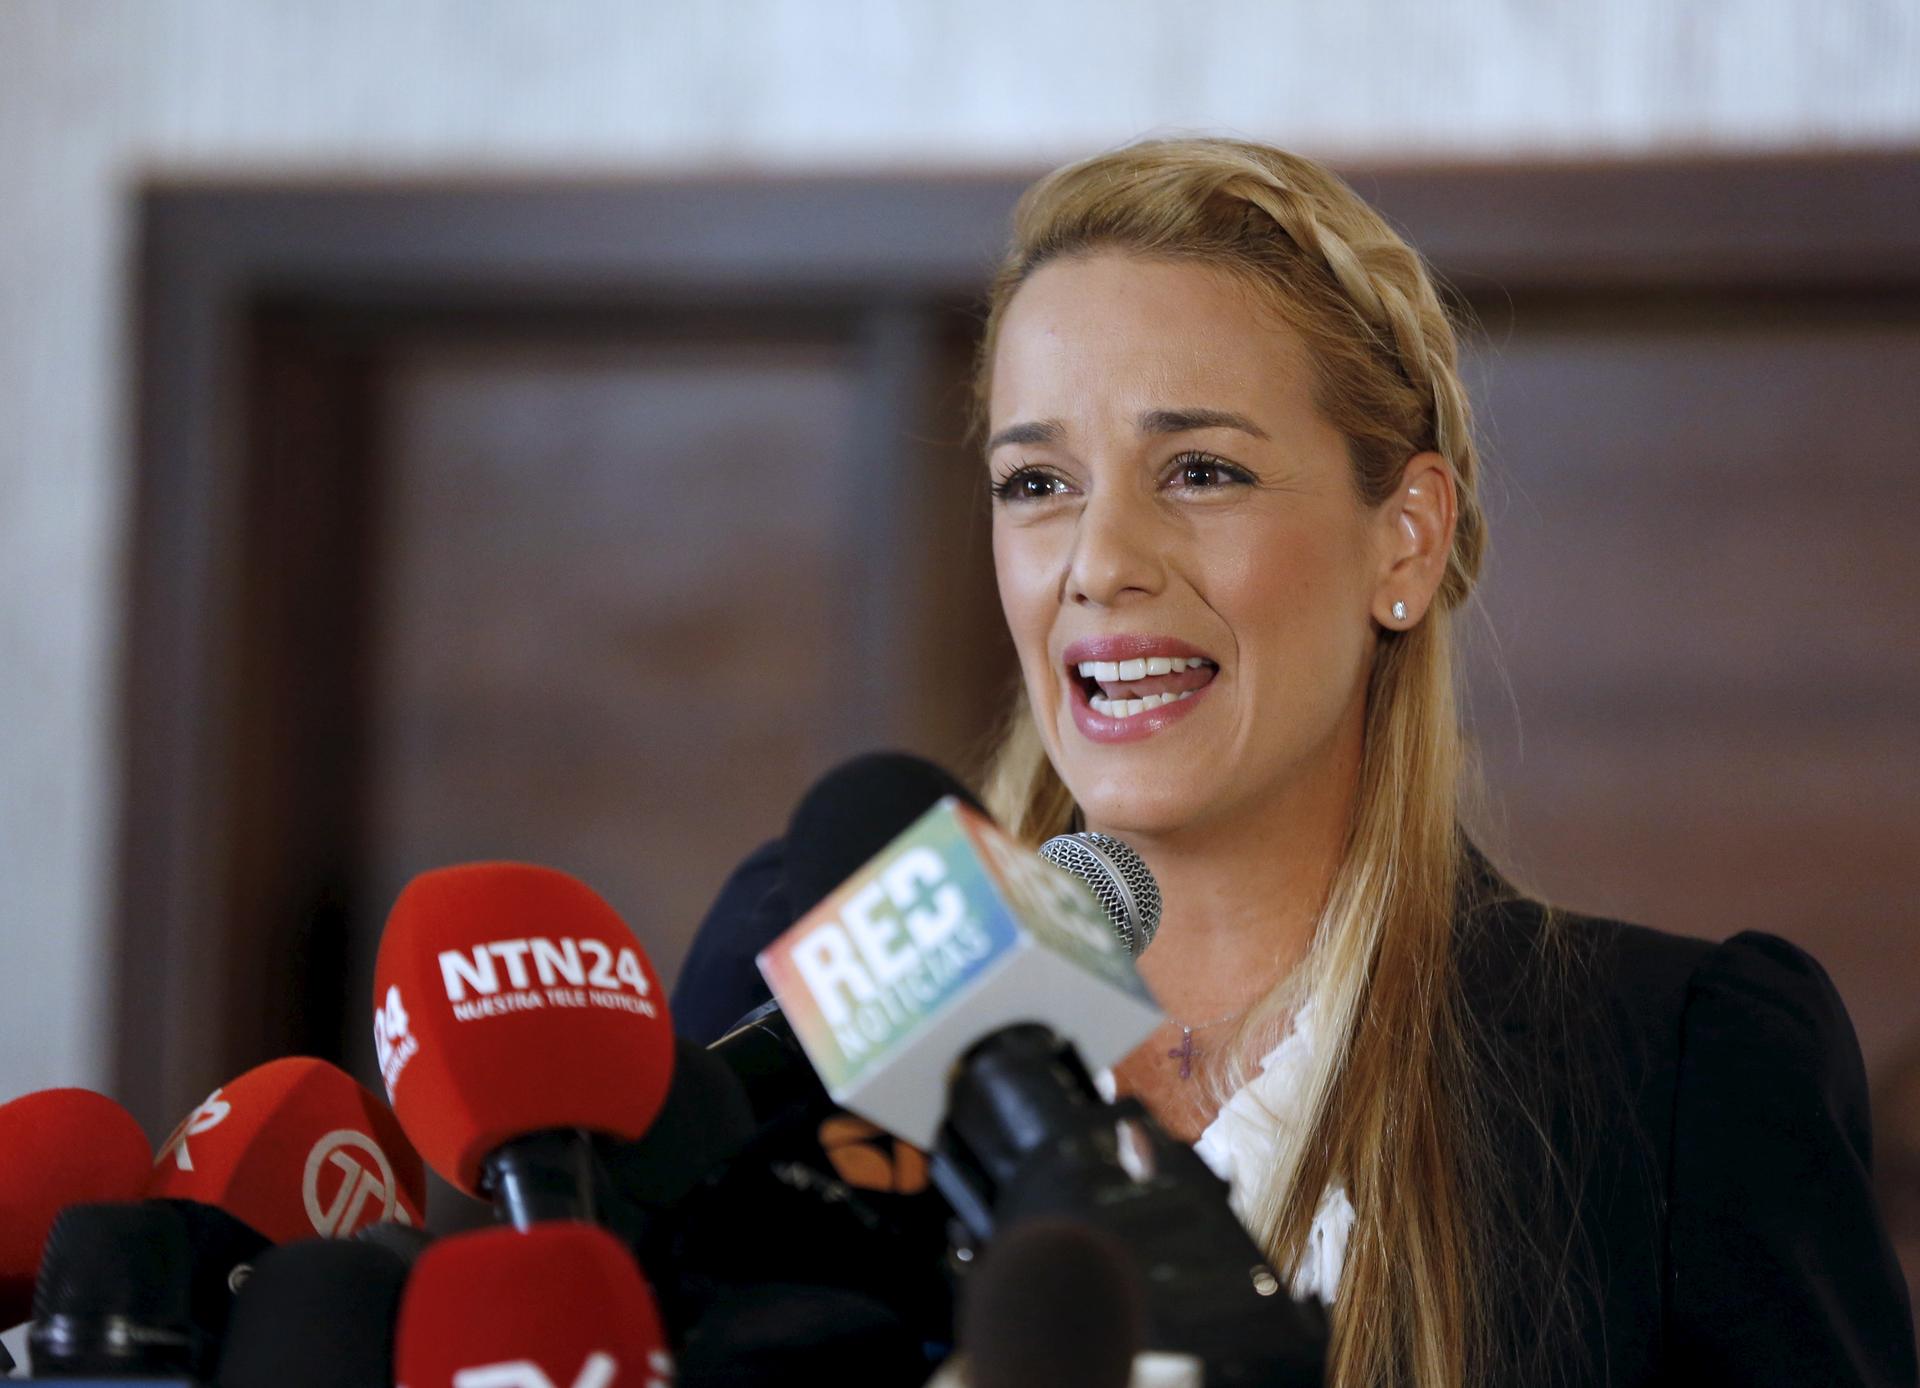 Lilian Tintori, wife of Venezuela's jailed opposition leader, Leopoldo Lopez, addresses the media during an event in support of jailed political opponents in Venezuela in Panama City on April 9, 2015.